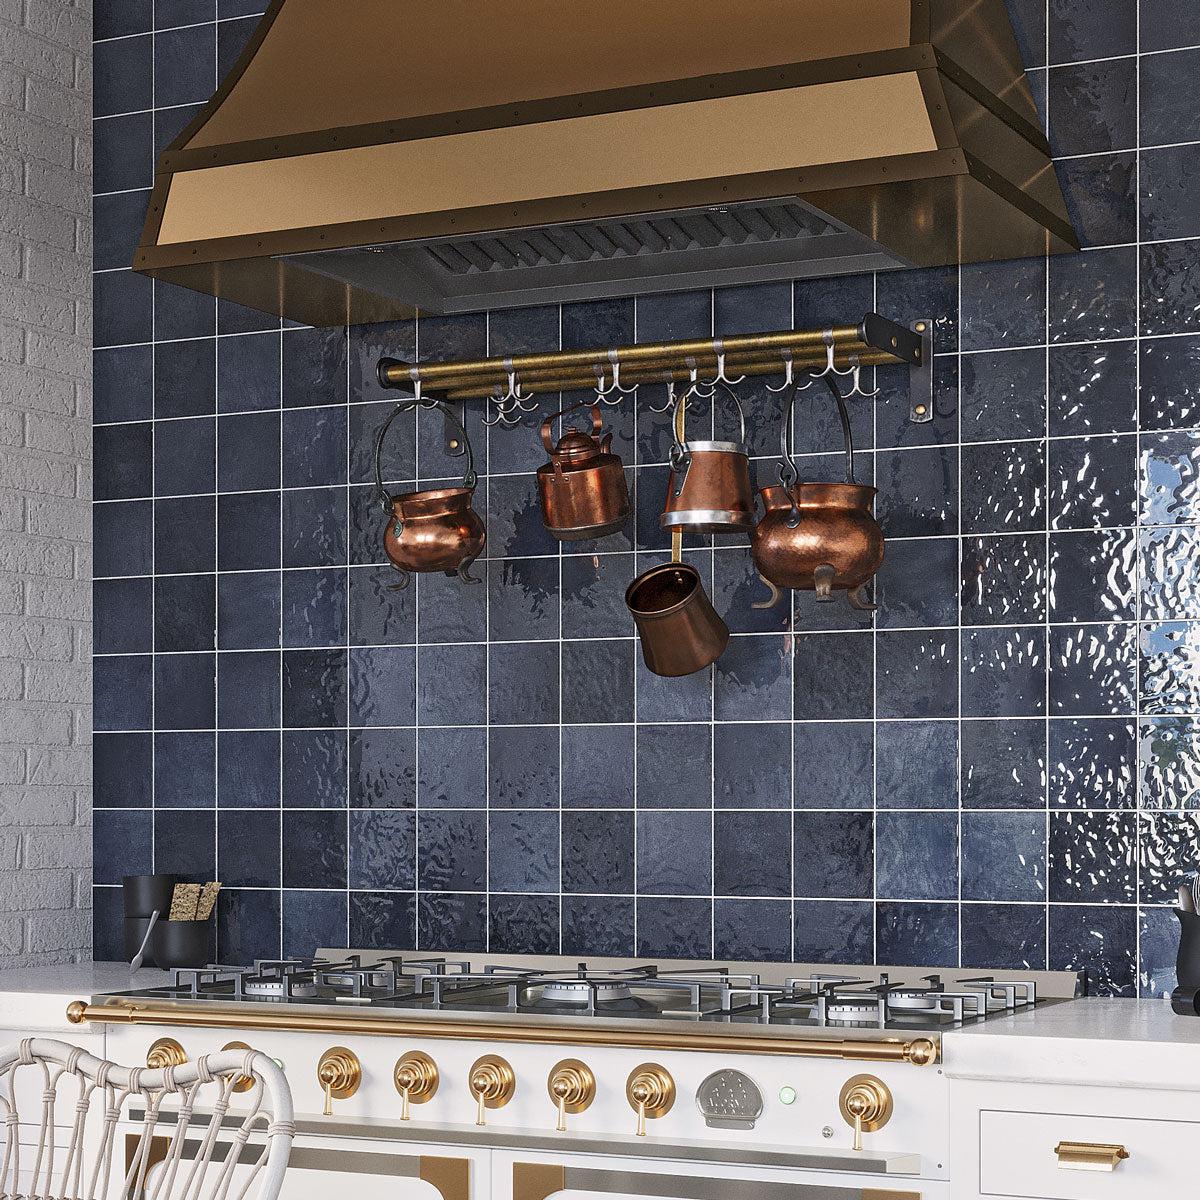 Handmade tile style in dark blue ceramic with a glossy finish